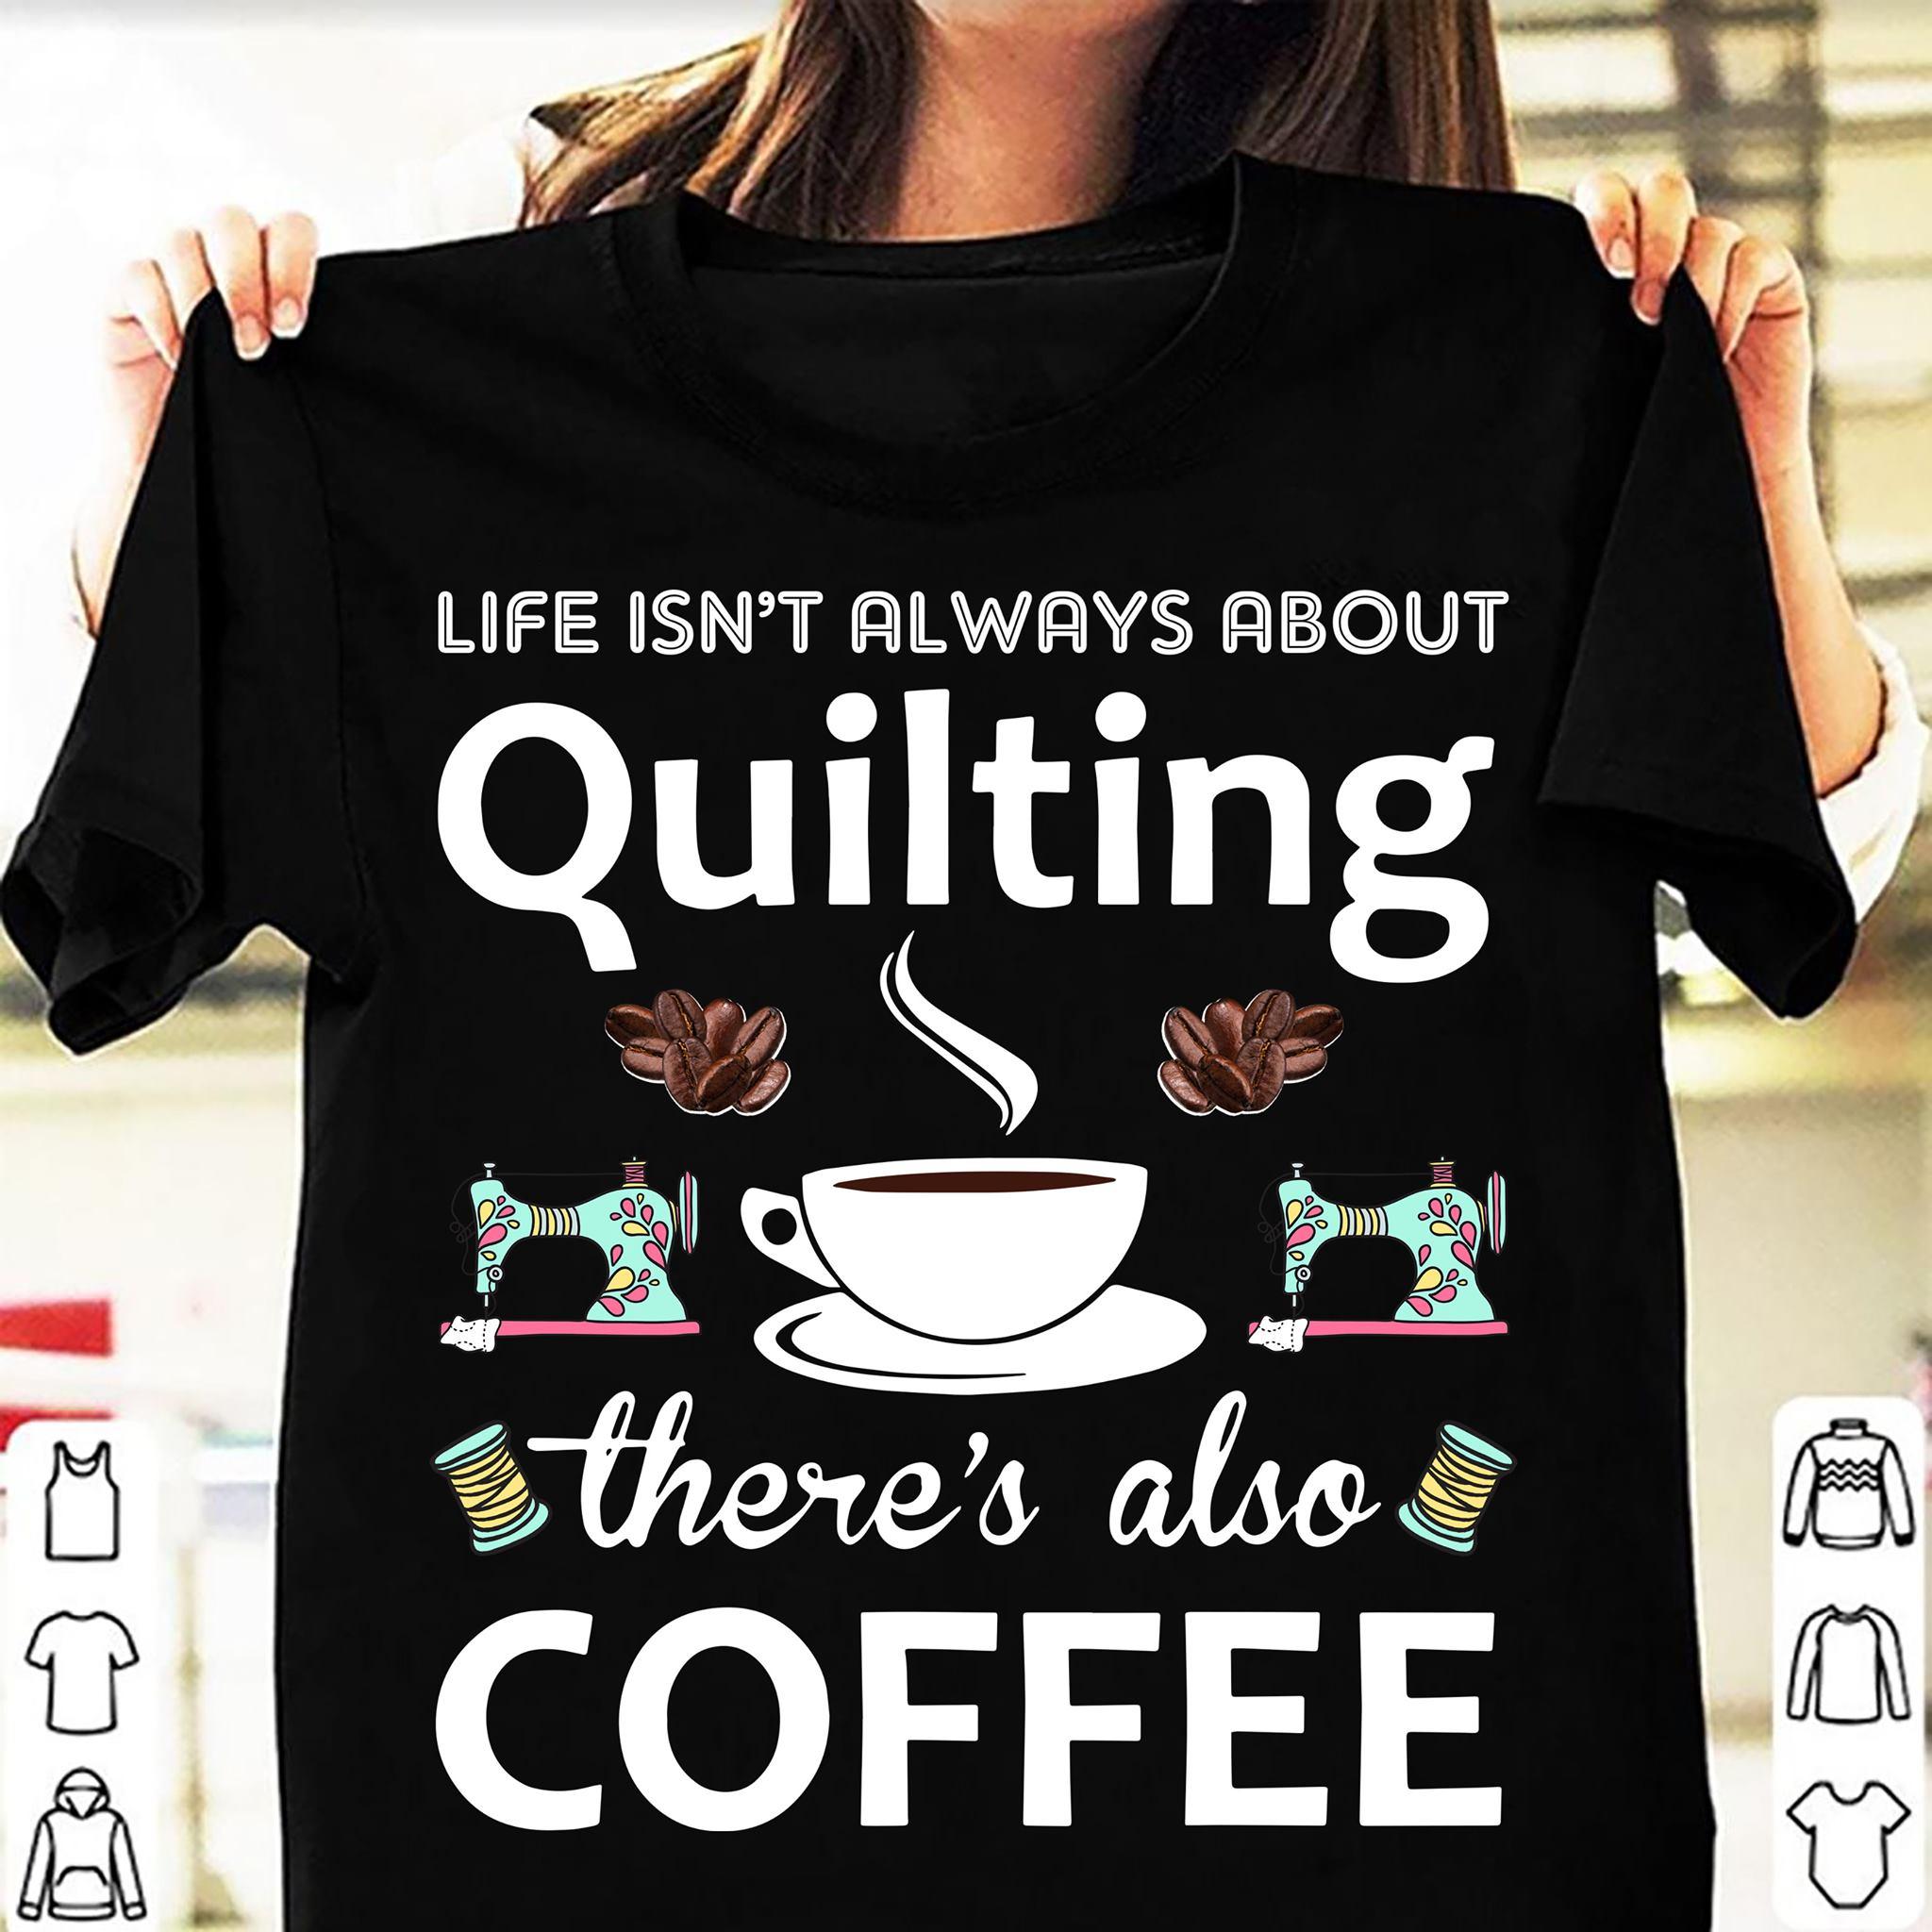 Life isn't always about quilting there's also coffee - Coffee and quilting, sewing machine graphic